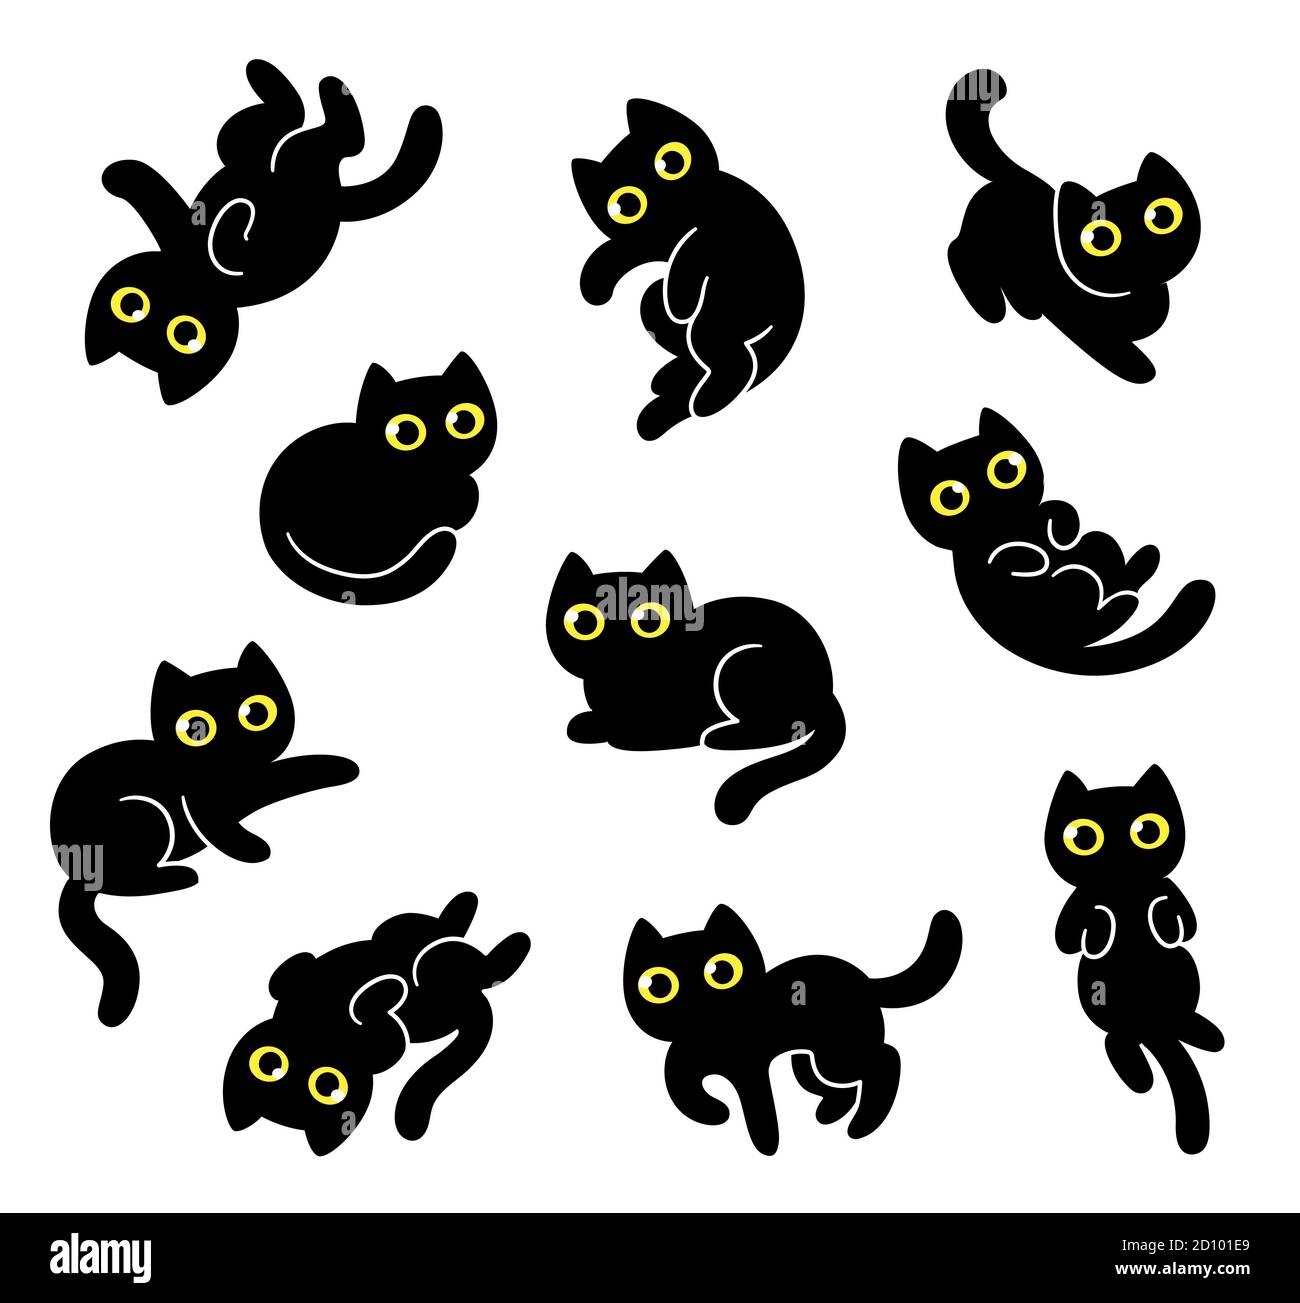 Little Angry and Cute Cat Hand Drawing Stock Vector - Illustration